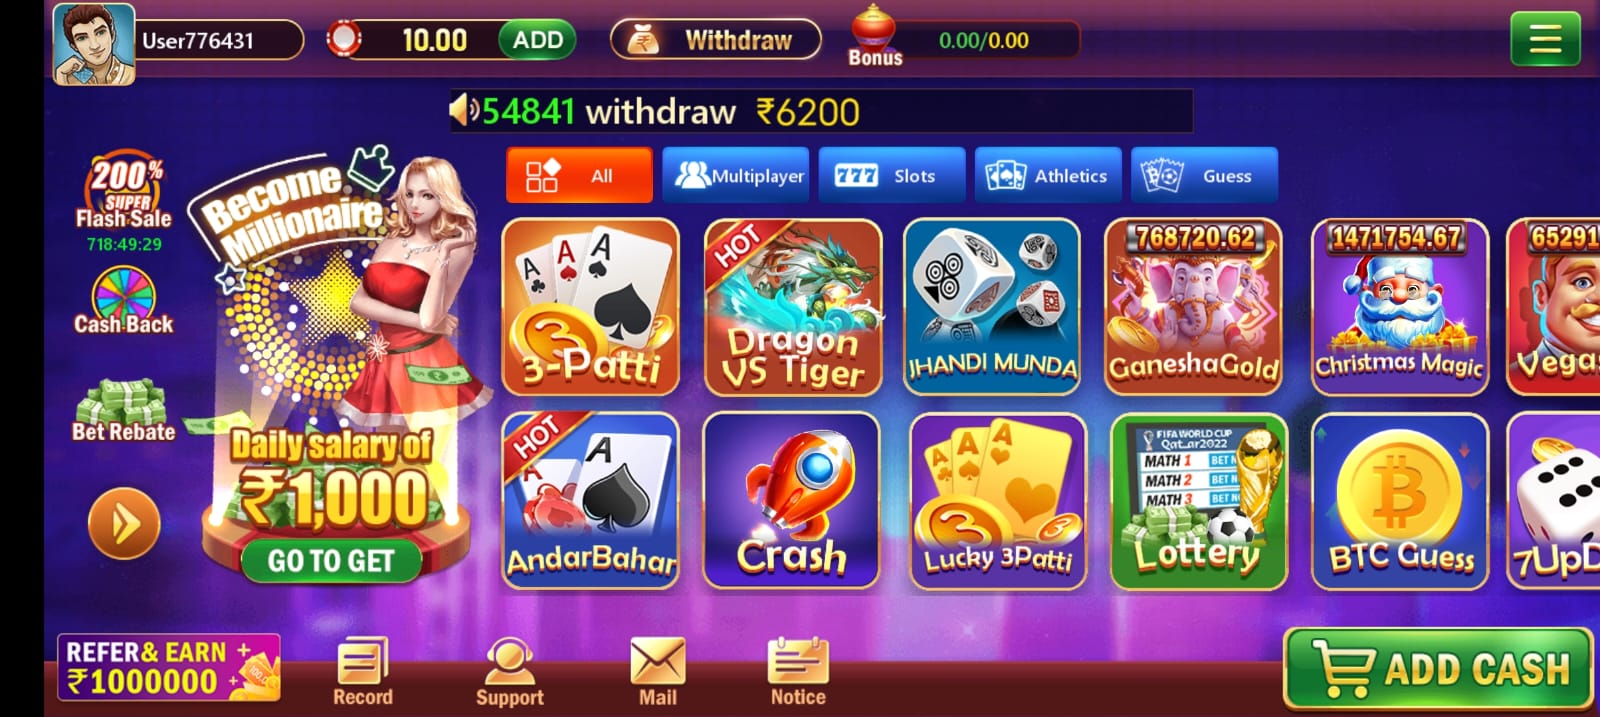 Available Games on Teen Patti Real Apk